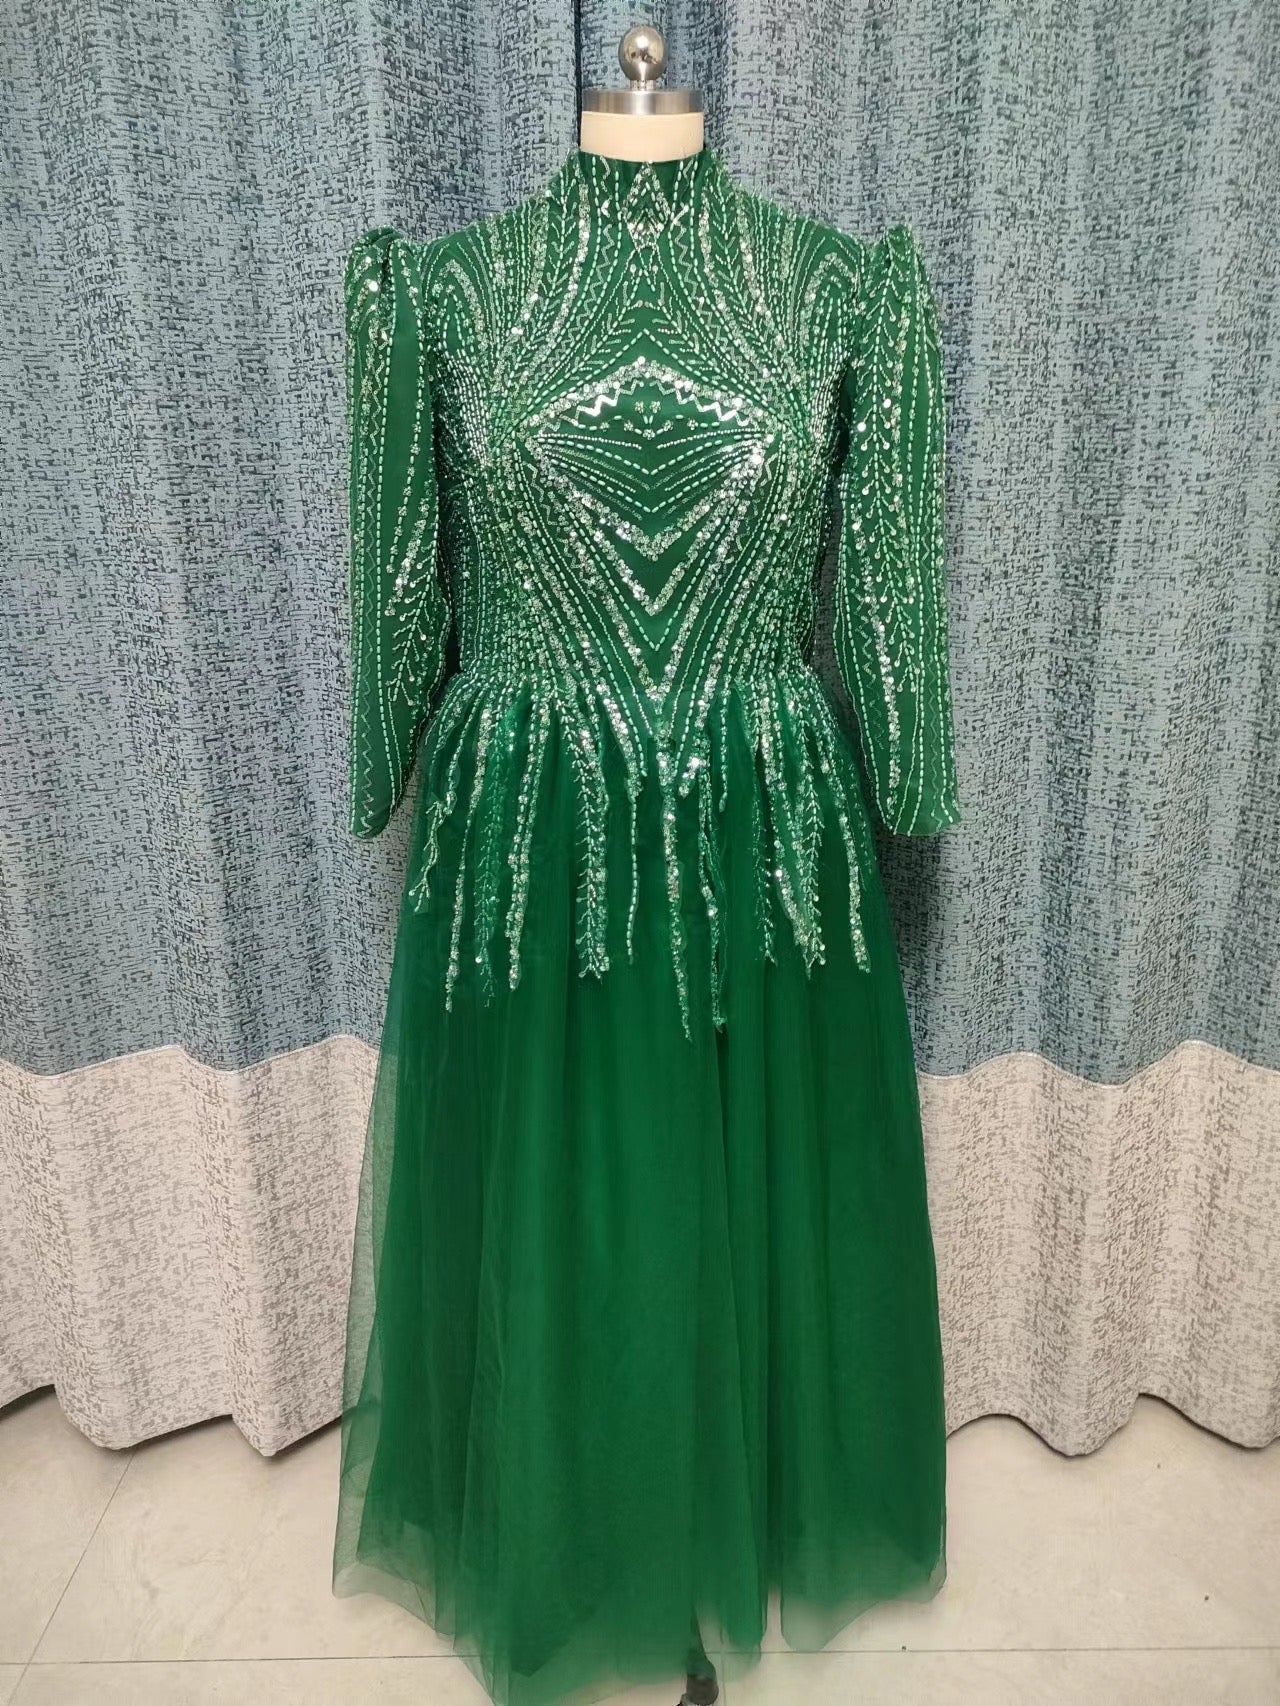 High Neck Luxury Beaded Emerald Green Tulle Women Formal Party Gowns